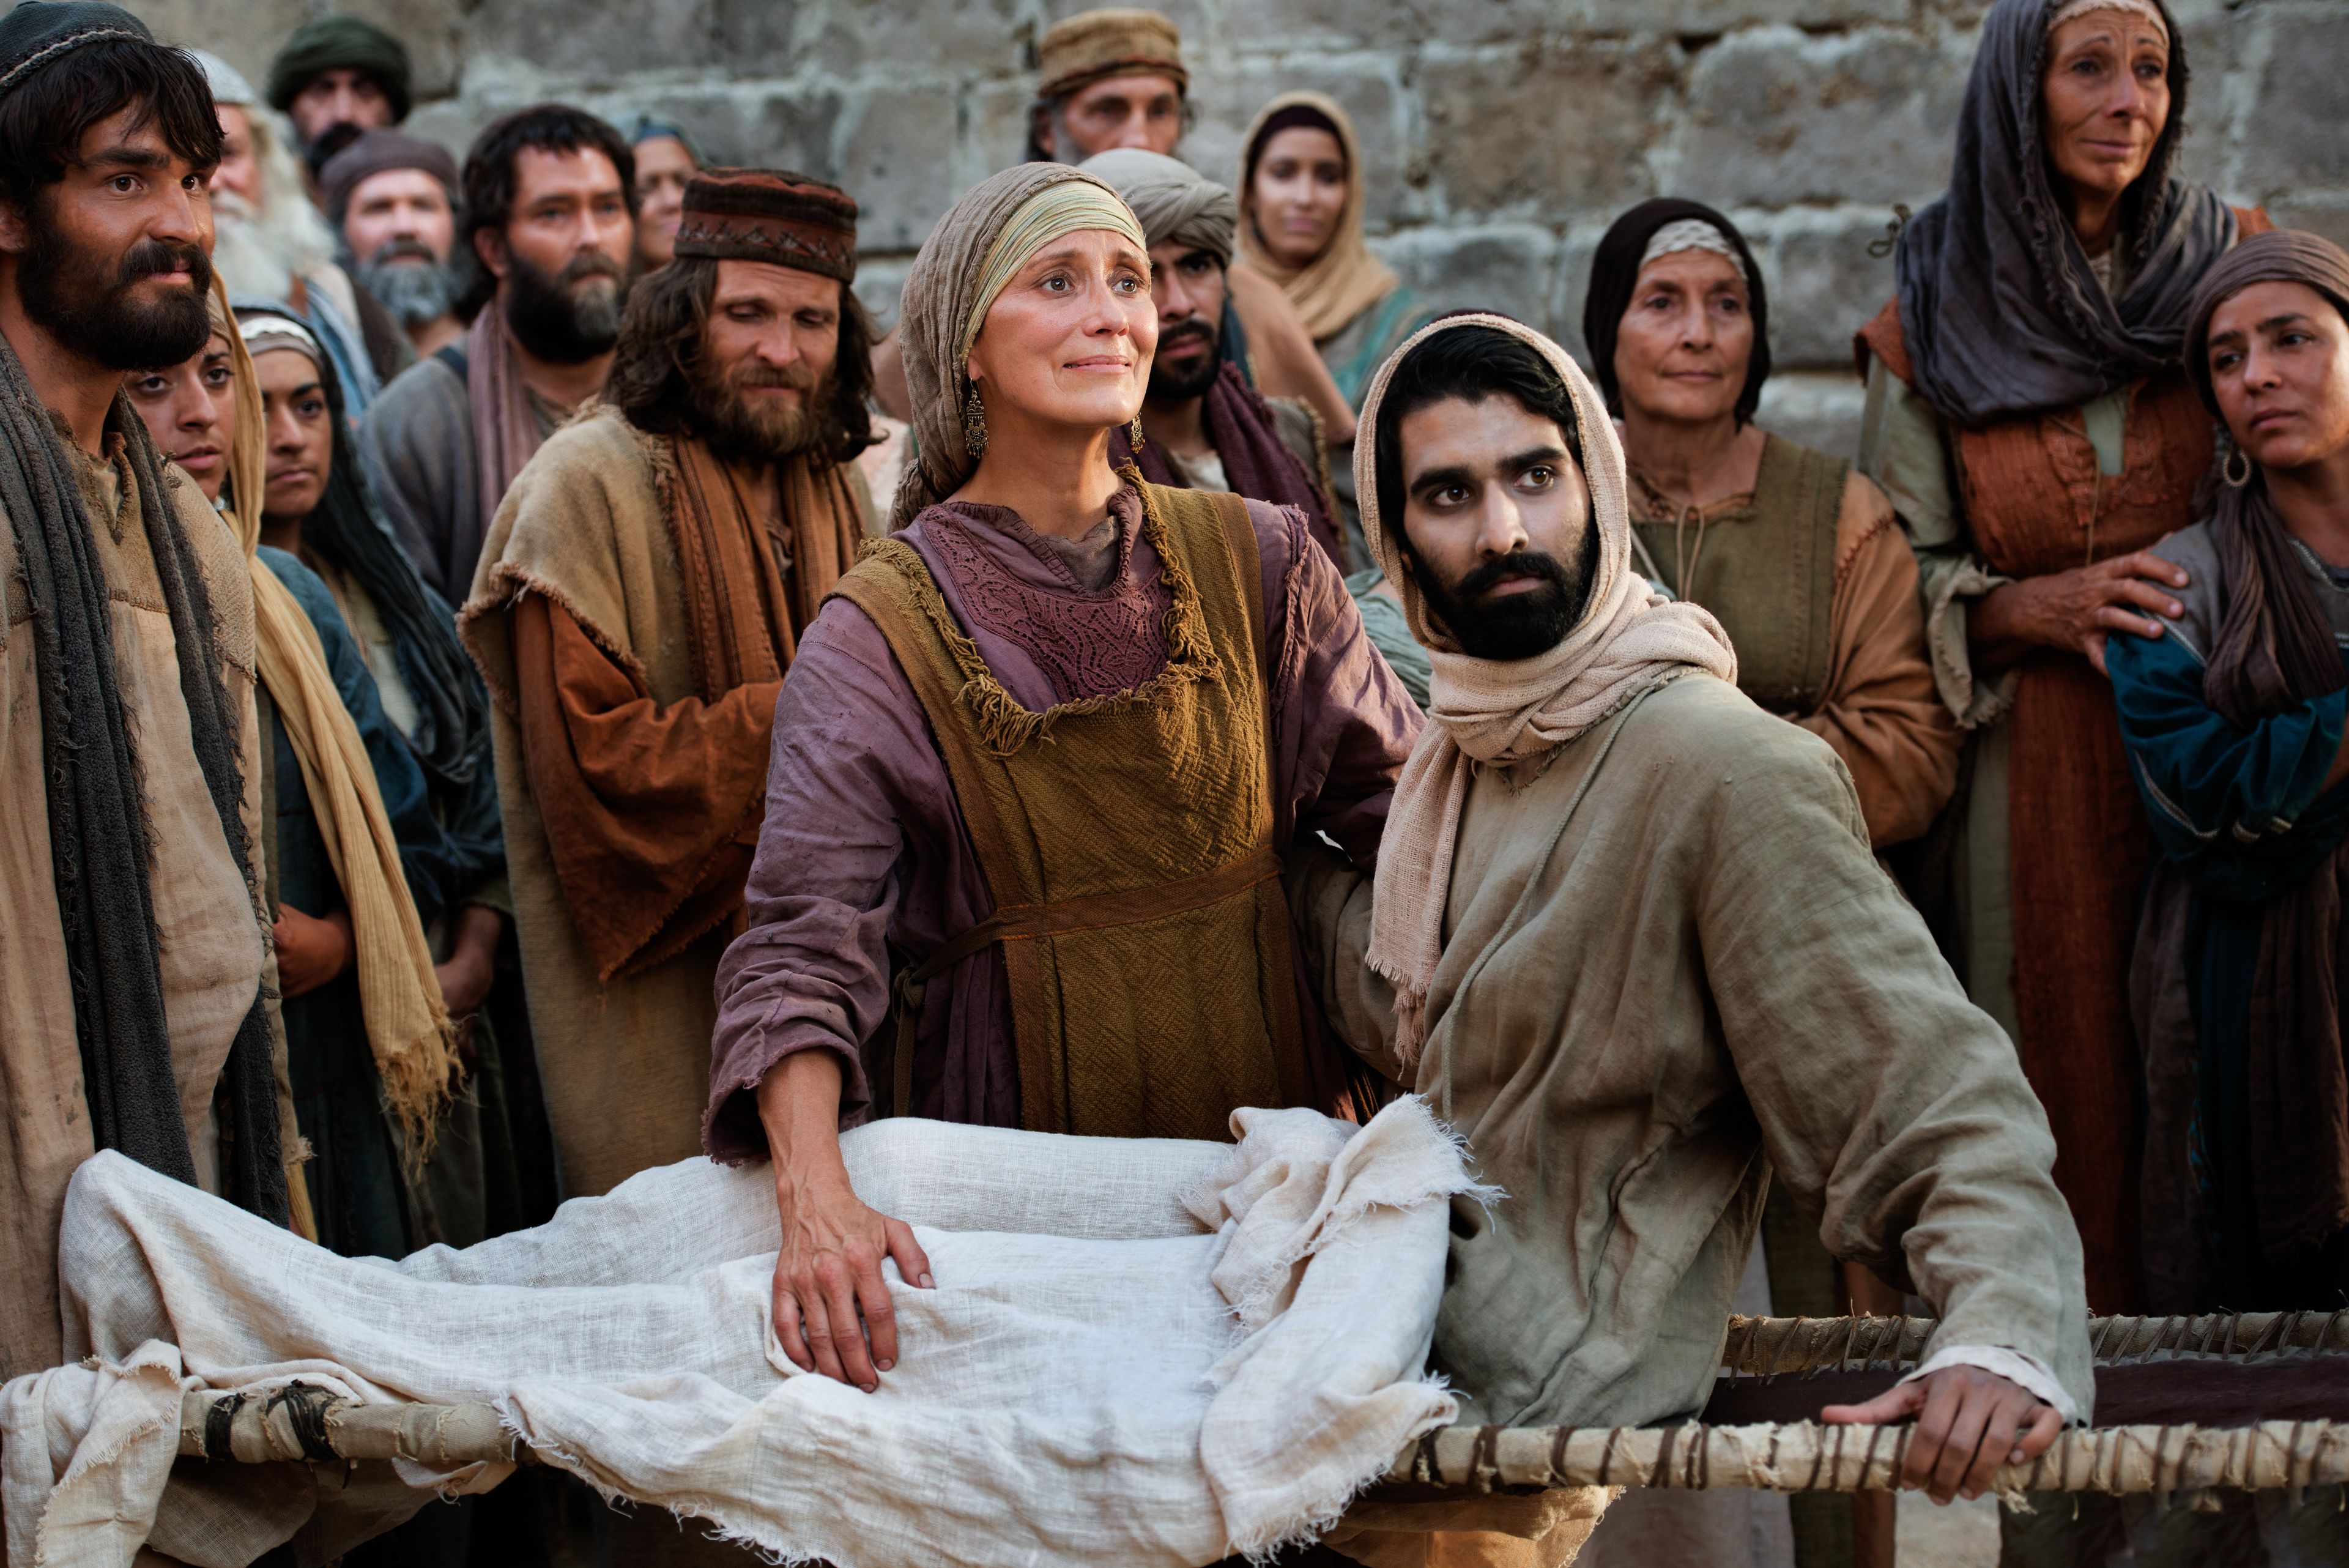 The widow of Nain looks at Jesus in gratitude after He has raised her son from the dead.